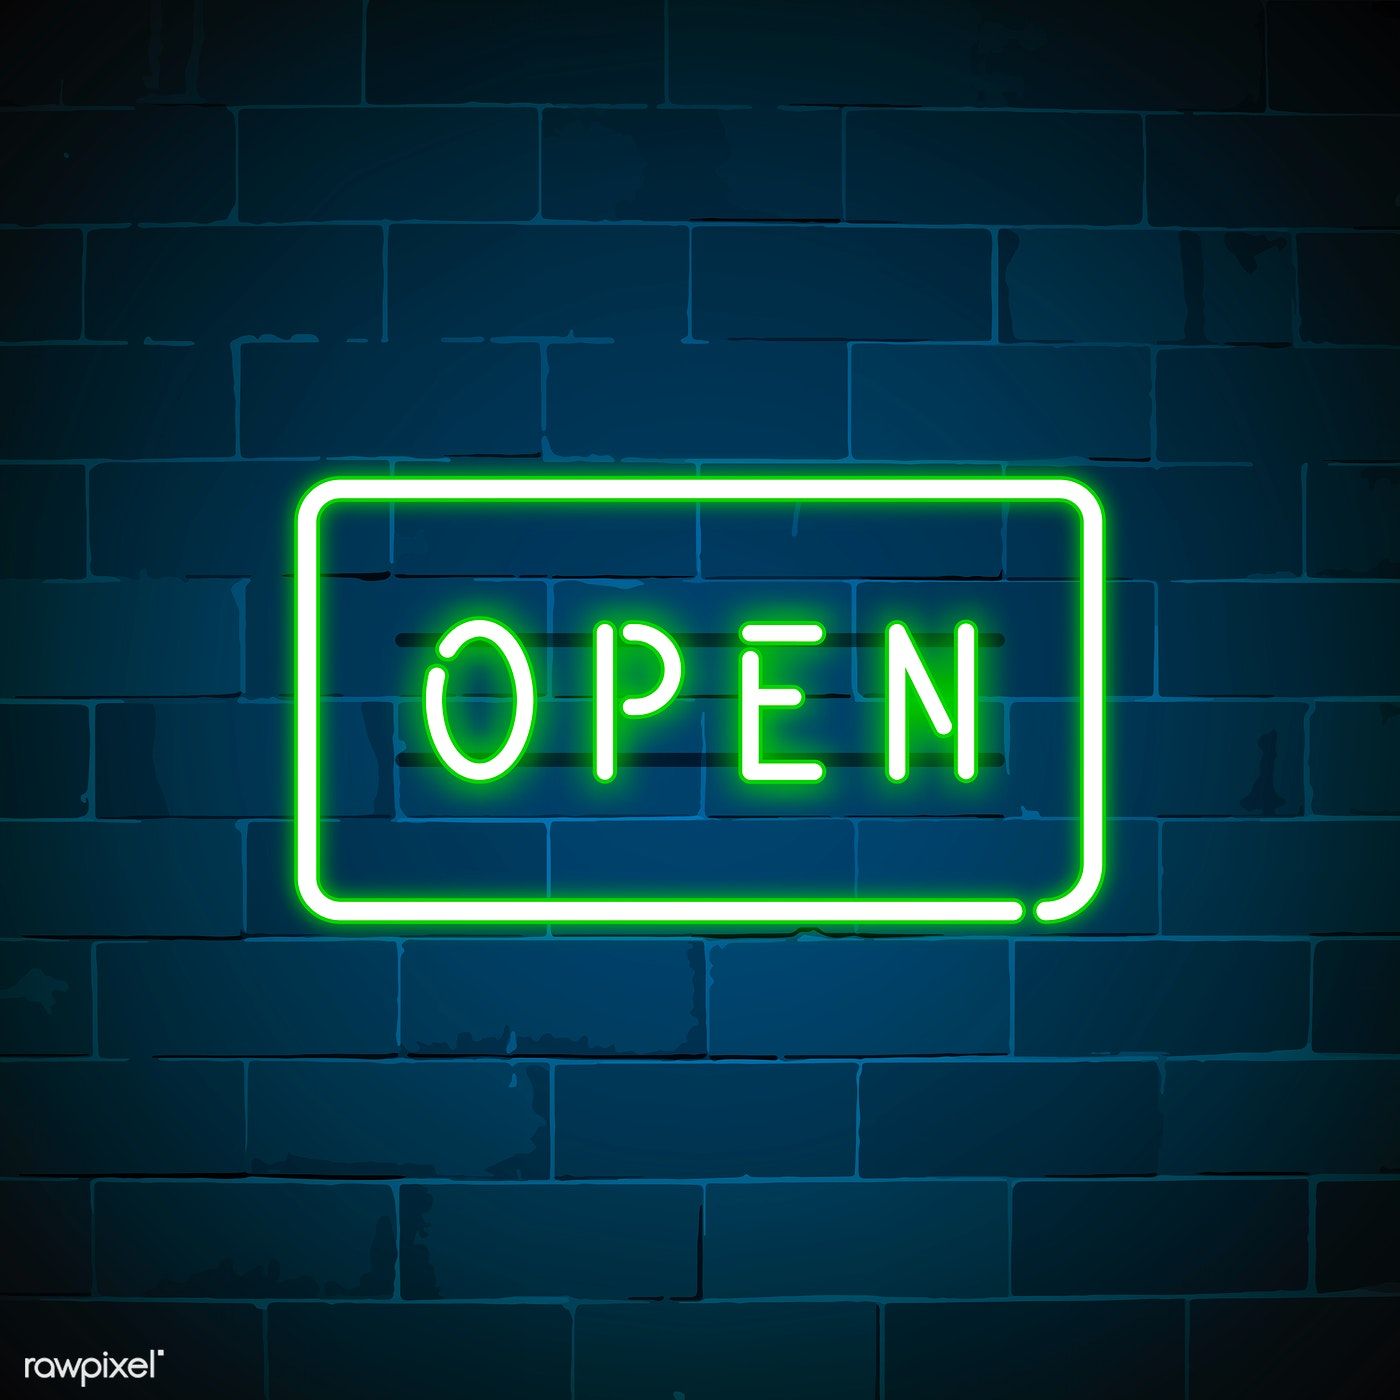 Open Shop Neon Sign Vector Image By Rawpixel Ningzk V